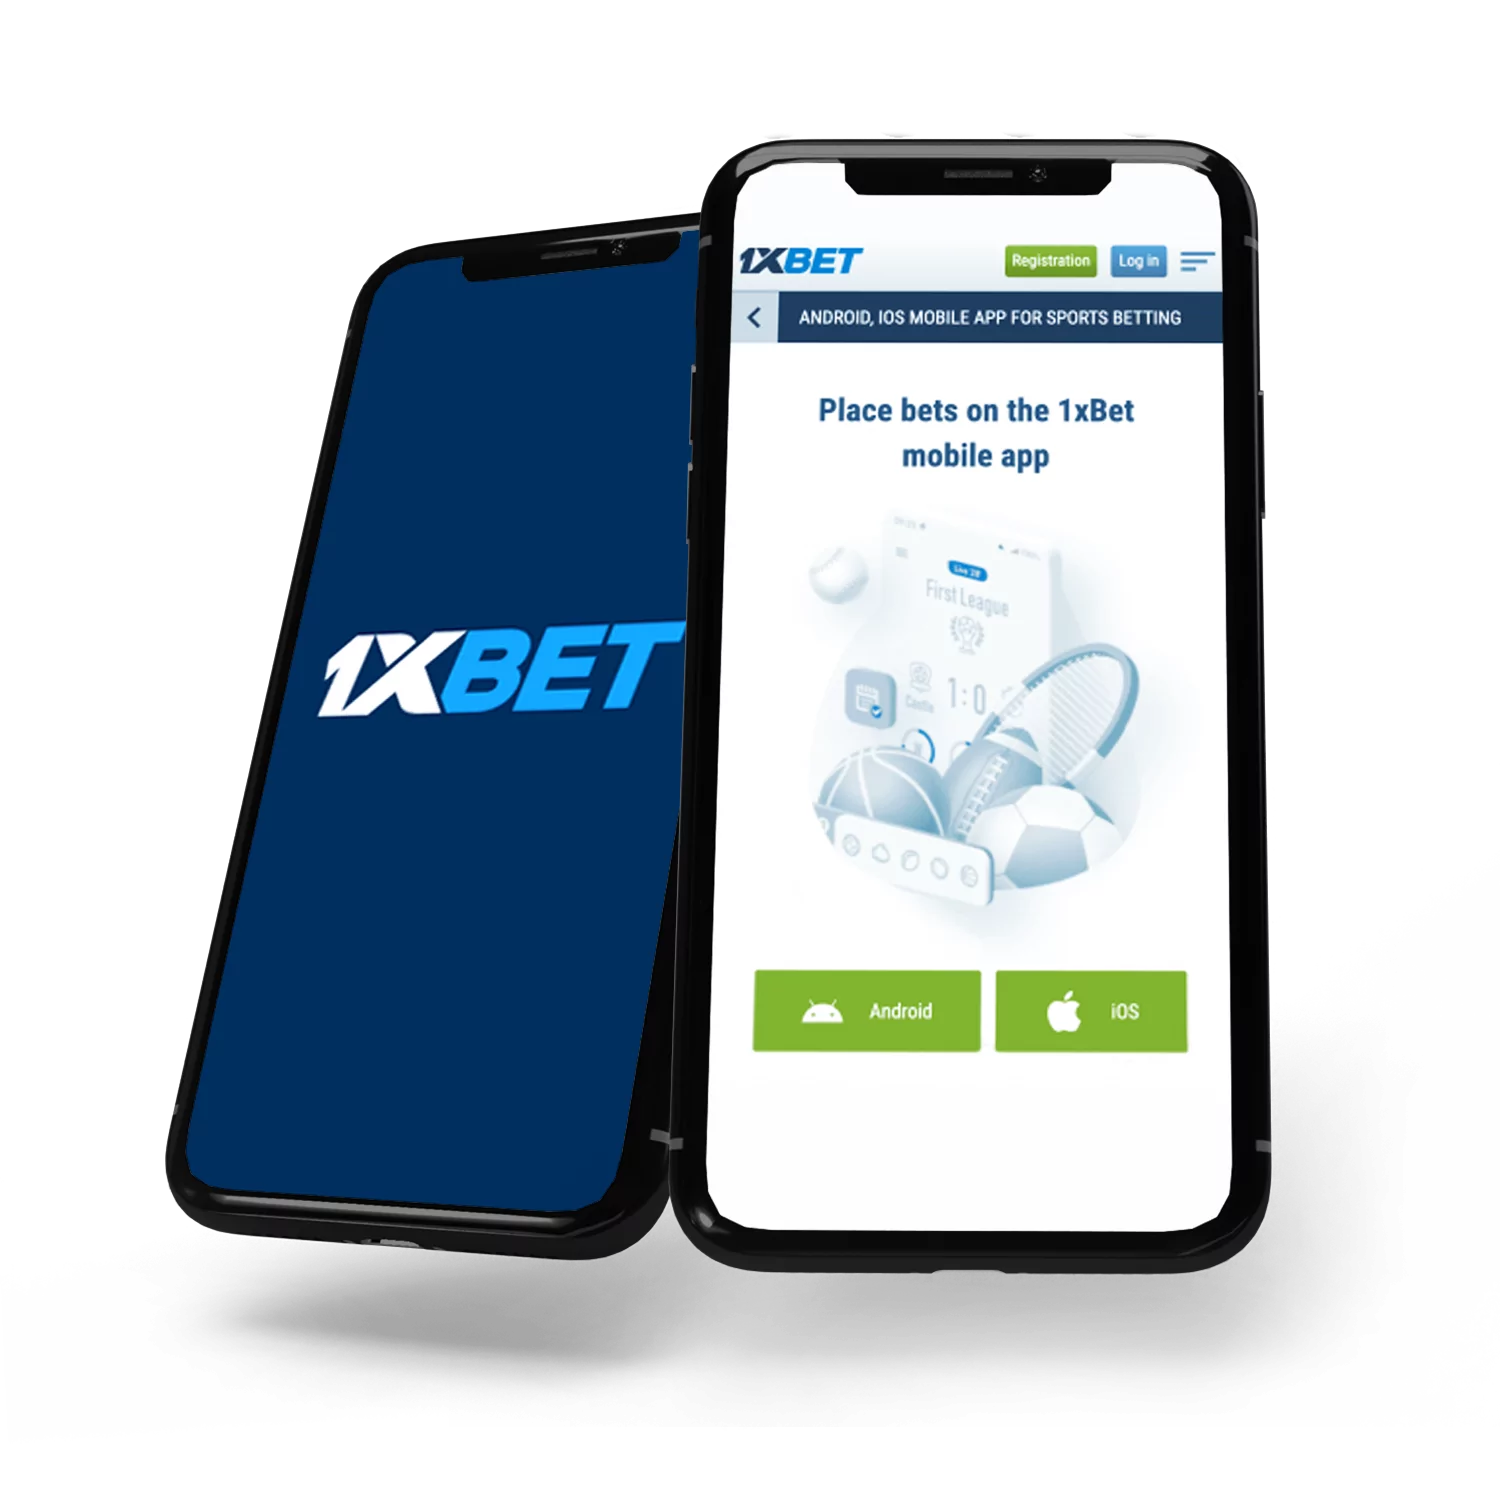 Free 1xbet mobile apps